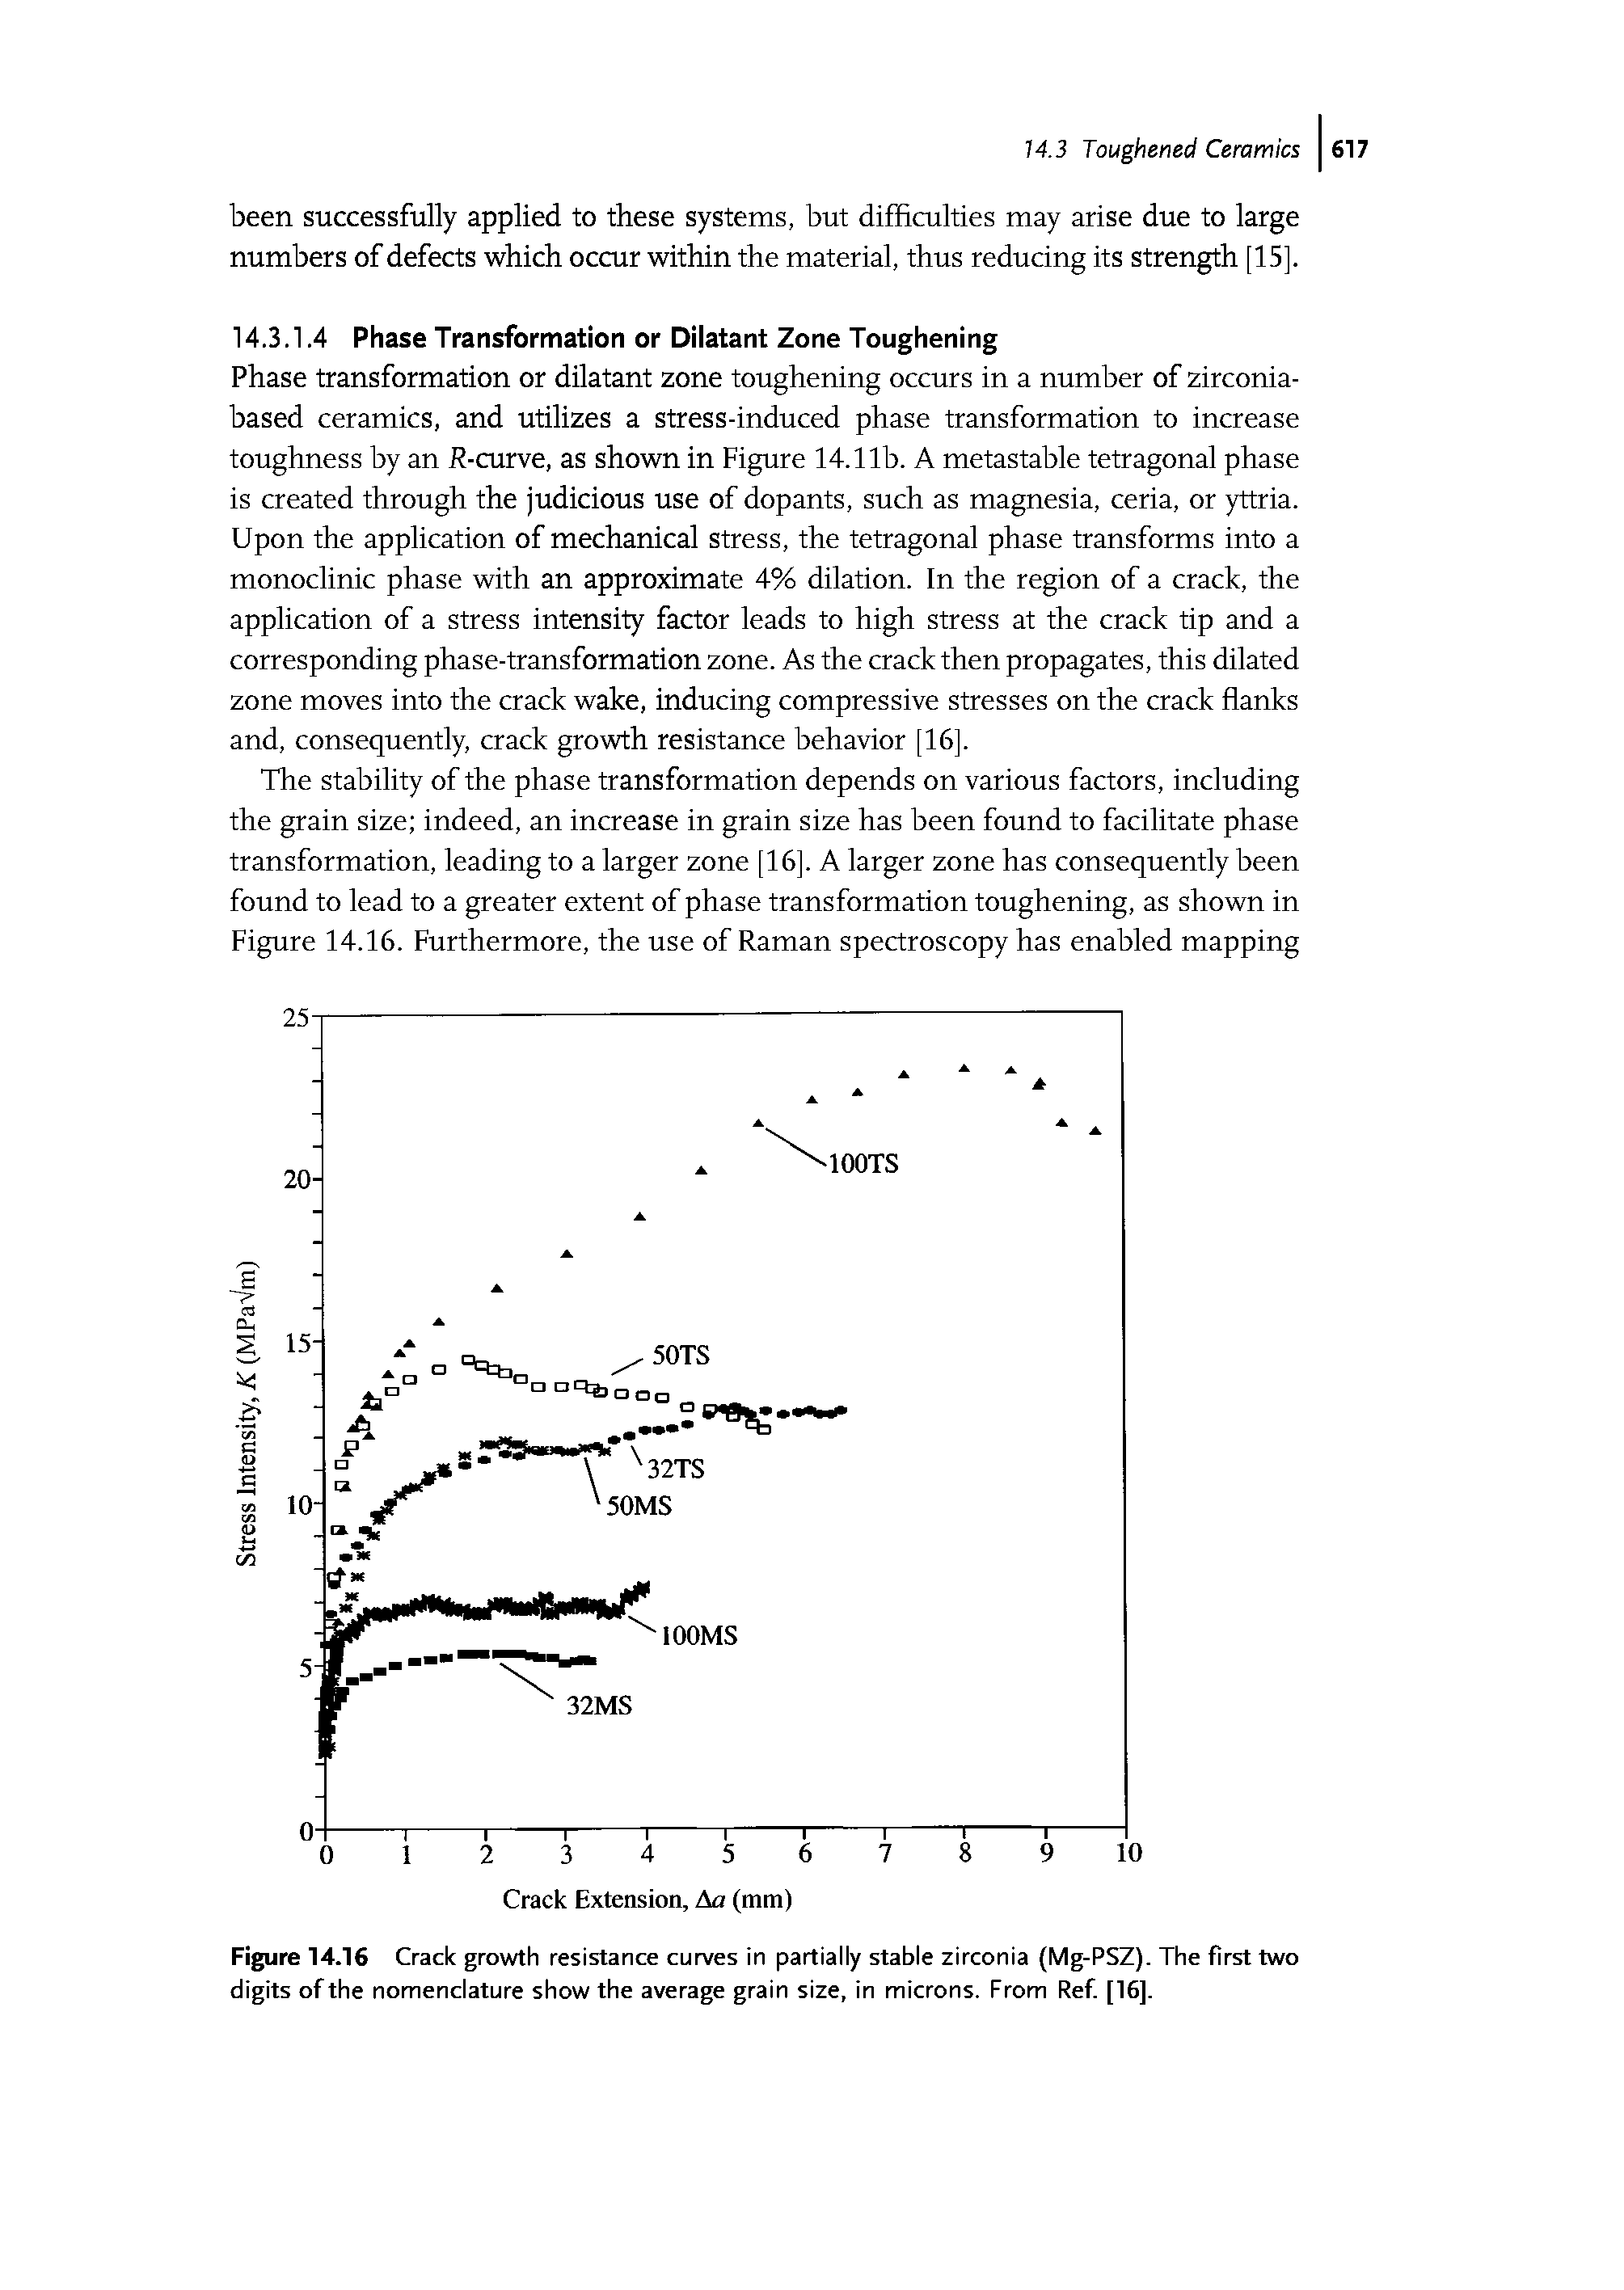 Figure 14.16 Crack growth resistance curves in partially stable zirconia (Mg-PSZ). The first two digits of the nomenclature show the average grain size, in microns. From Ref. [16].